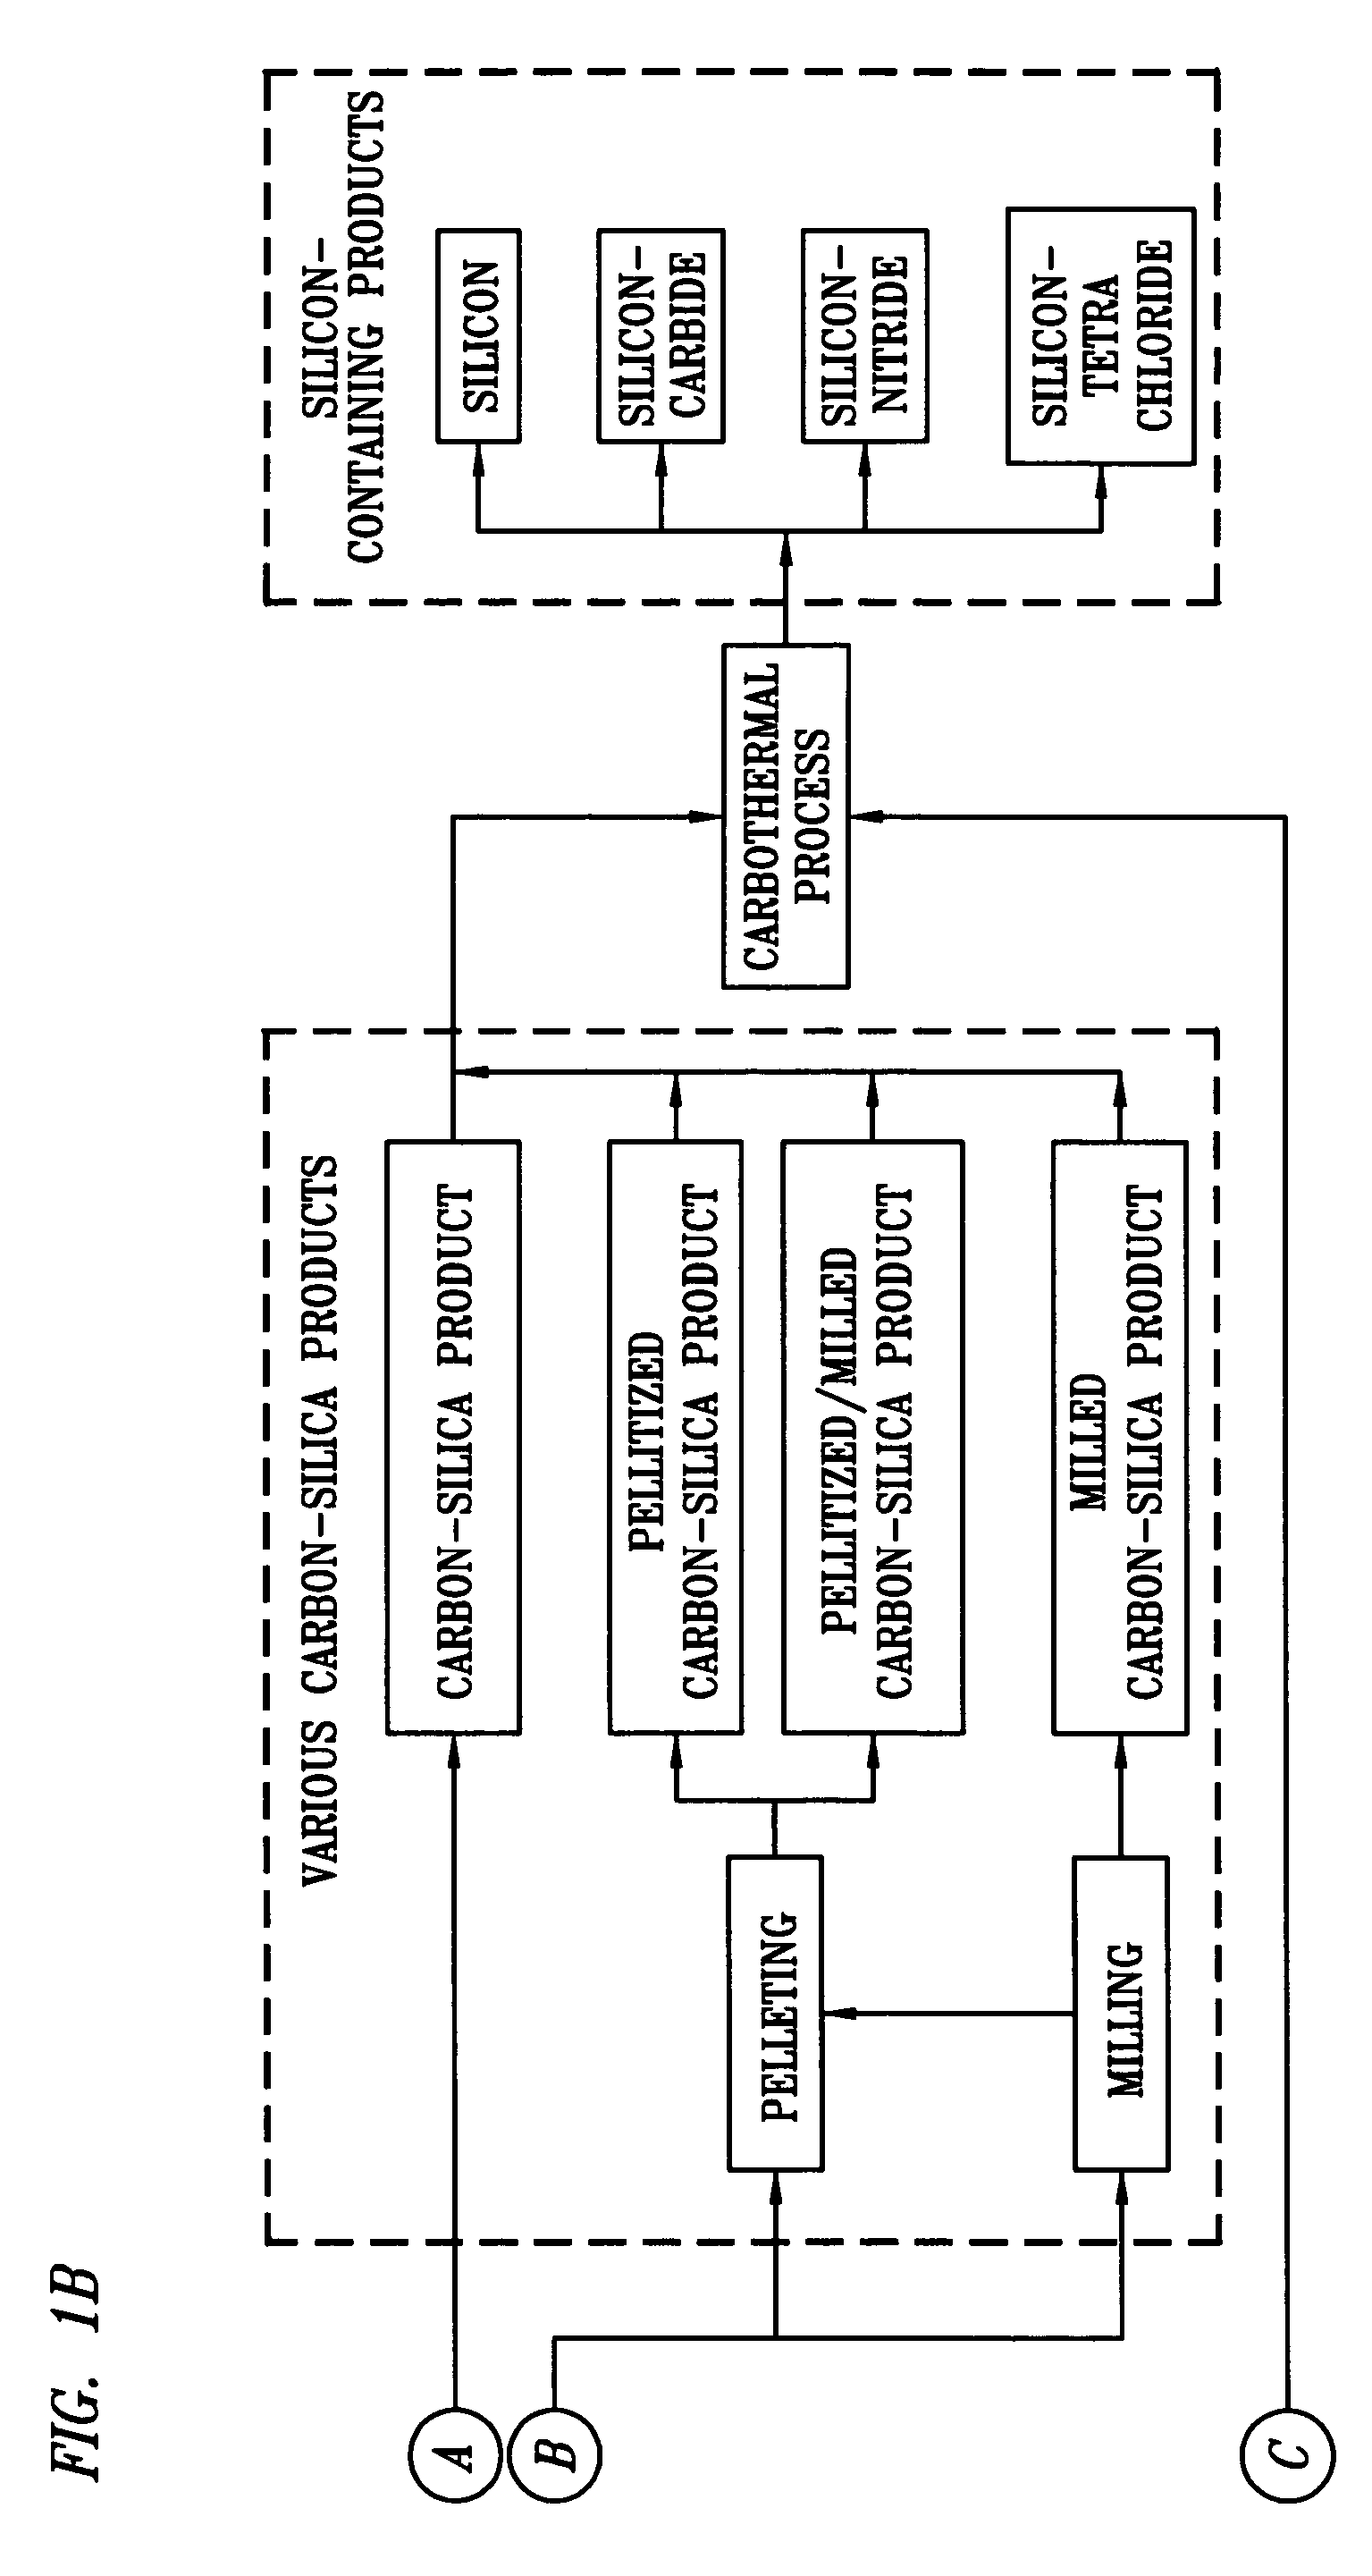 Composition and method for making silicon-containing products